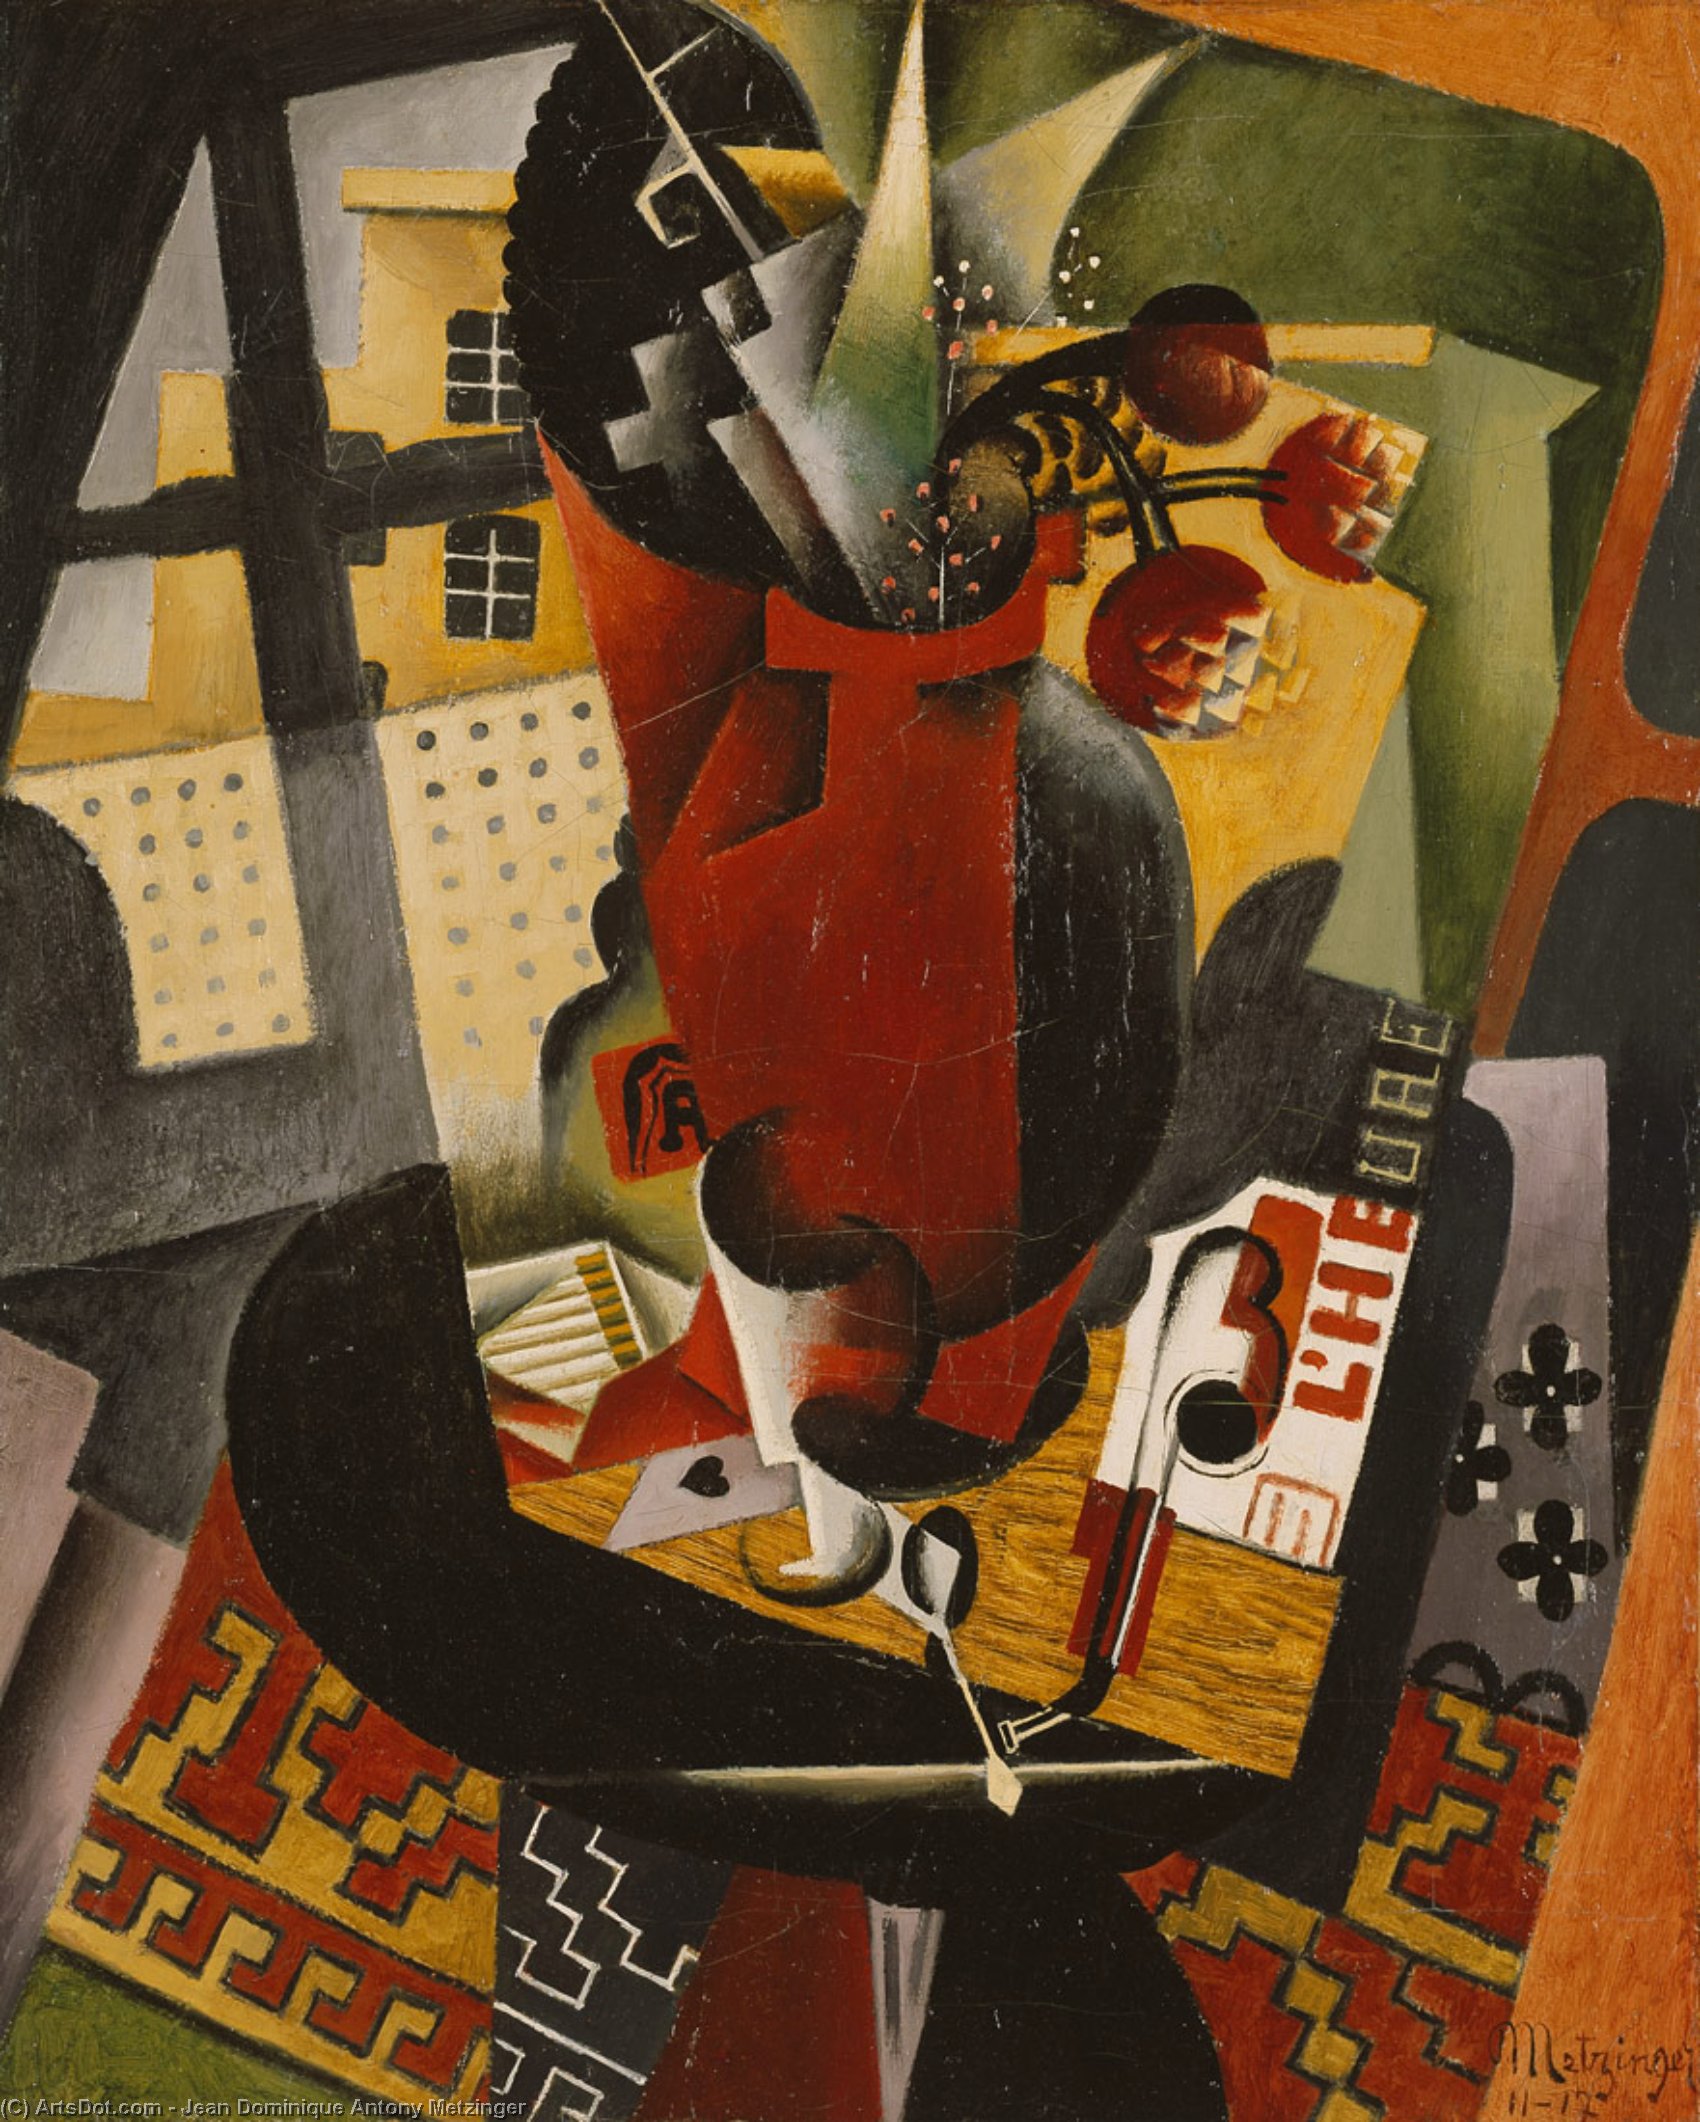 Order Oil Painting Replica Table By A Window, 1917 by Jean Dominique Antony Metzinger (Inspired By) (1883-1956, France) | ArtsDot.com